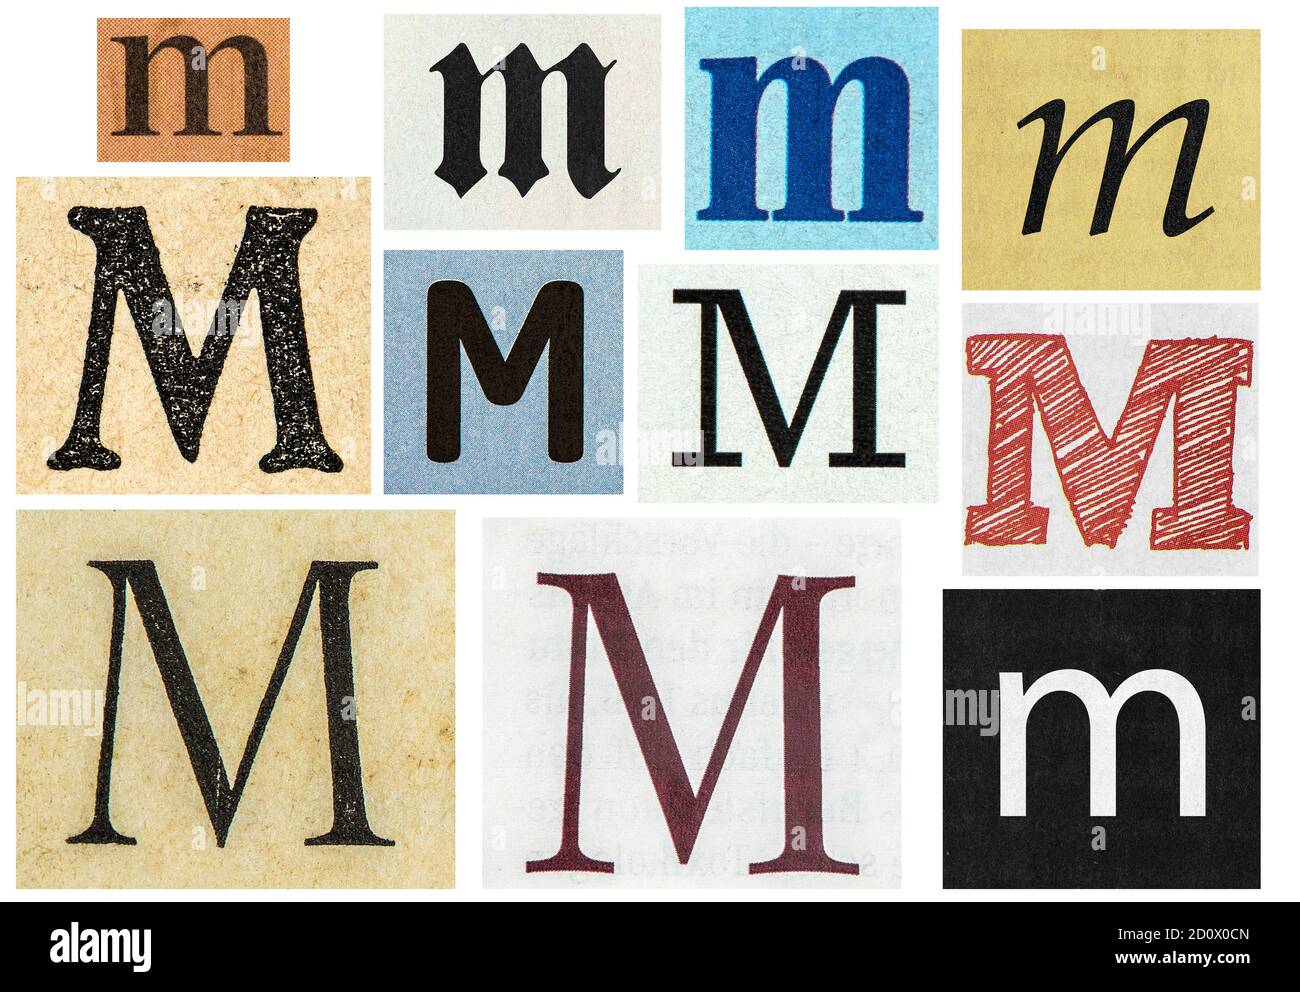 Paper Cut Letters Old Newspaper Magazine Uppercase Cutouts Stock Photo Alamy